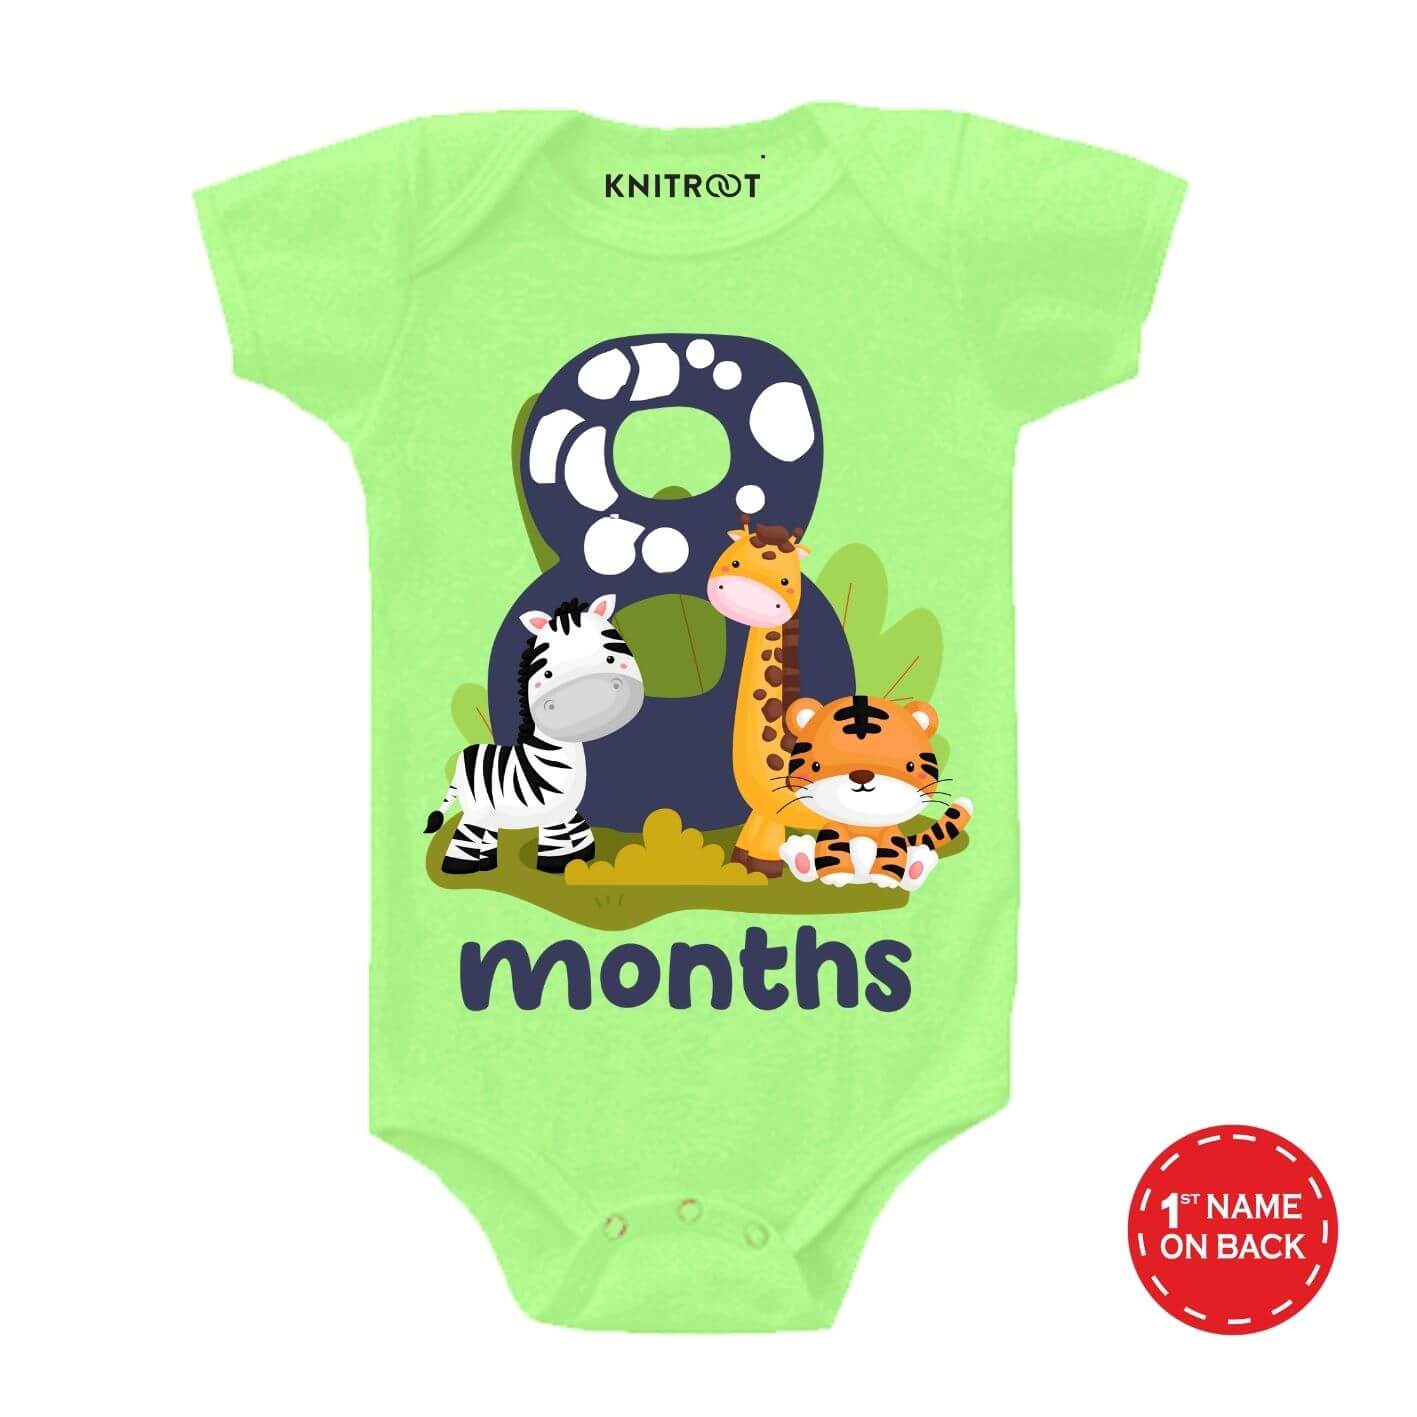 Buy baby boy clothes 3-6 months bundle new at Ubuy India